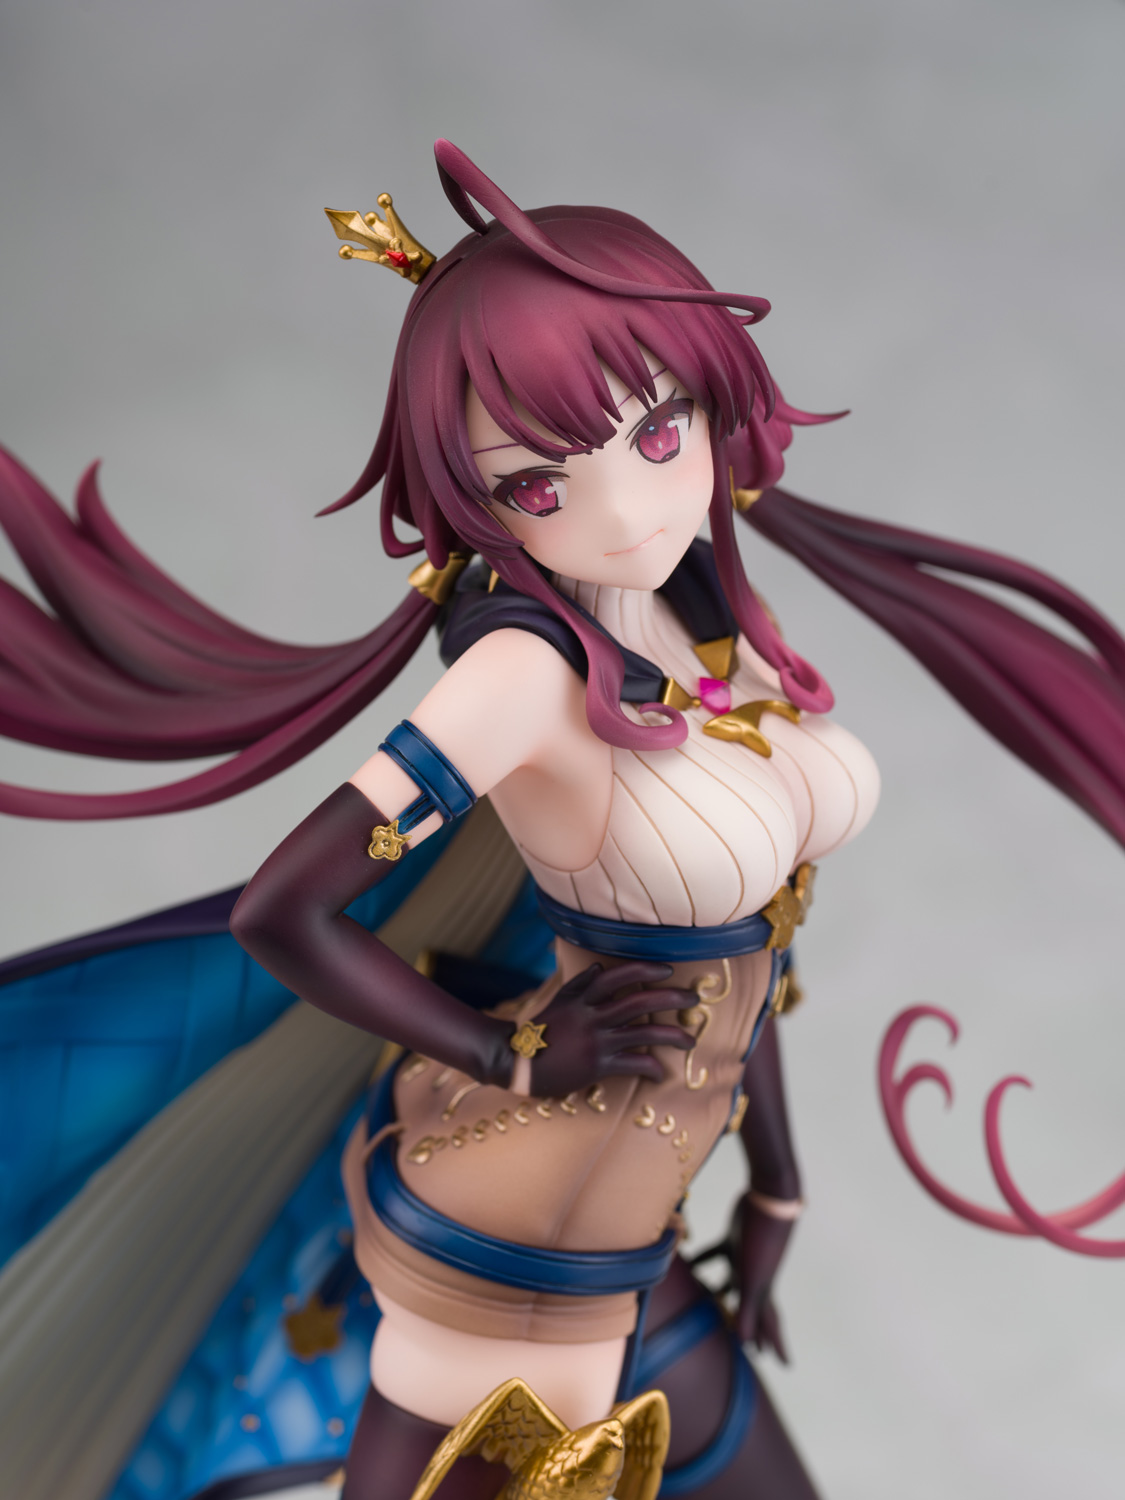 Atelier Sophie 2 The Alchemist of the Mysterious Dream - Ramizel Erlenmeyer  1/7 Scale Figure